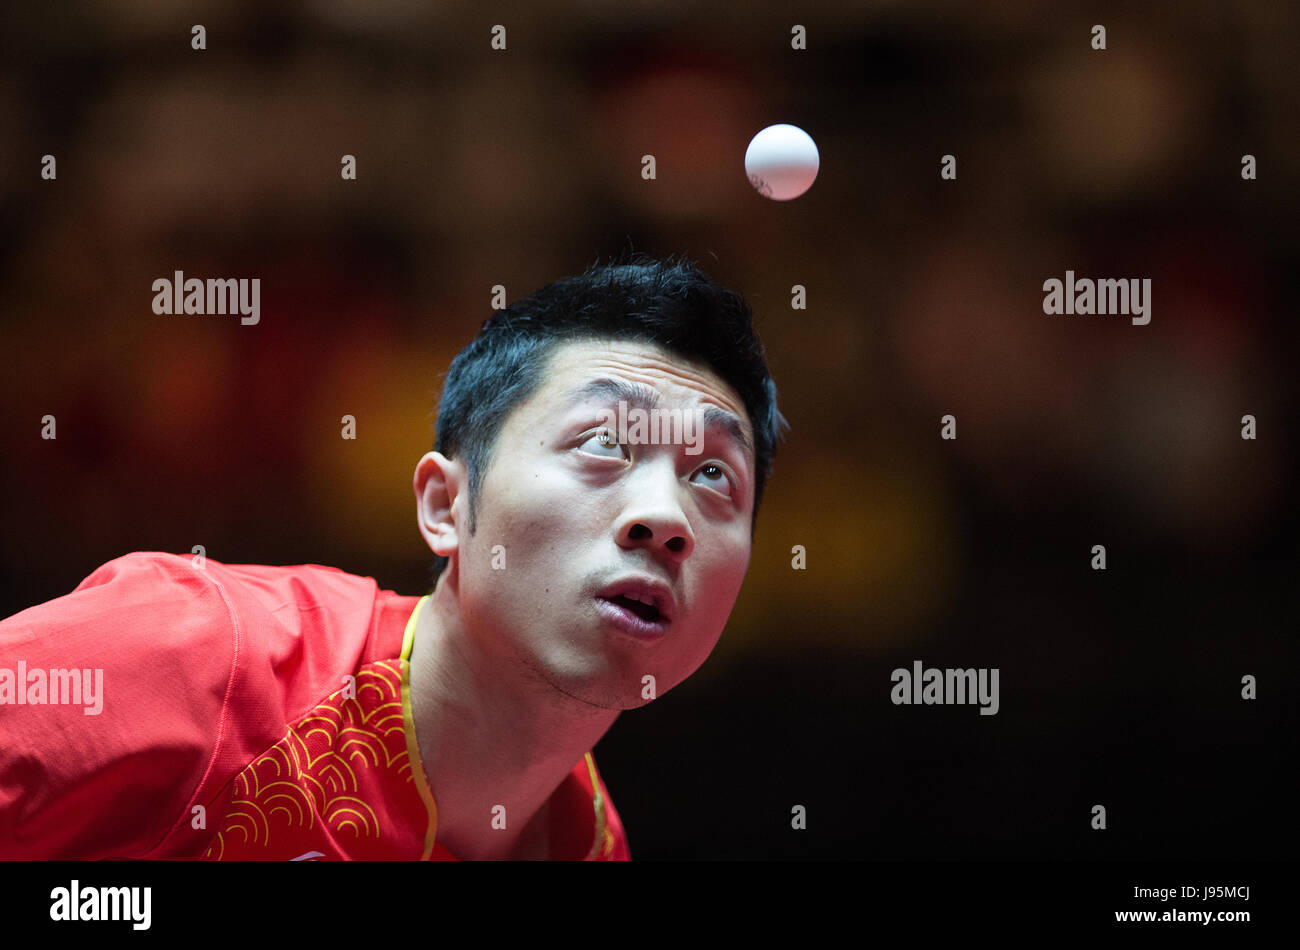 Duesseldorf, Germany. 5th May, 2017. Chinese table tennis player Xu Xing in action against his Chinese opponent Ma Long at the Table Tennis World Championships in the exposition halls in Duesseldorf, Germany, 5 May 2017. Photo: Jonas Güttler/dpa/Alamy Live News Stock Photo